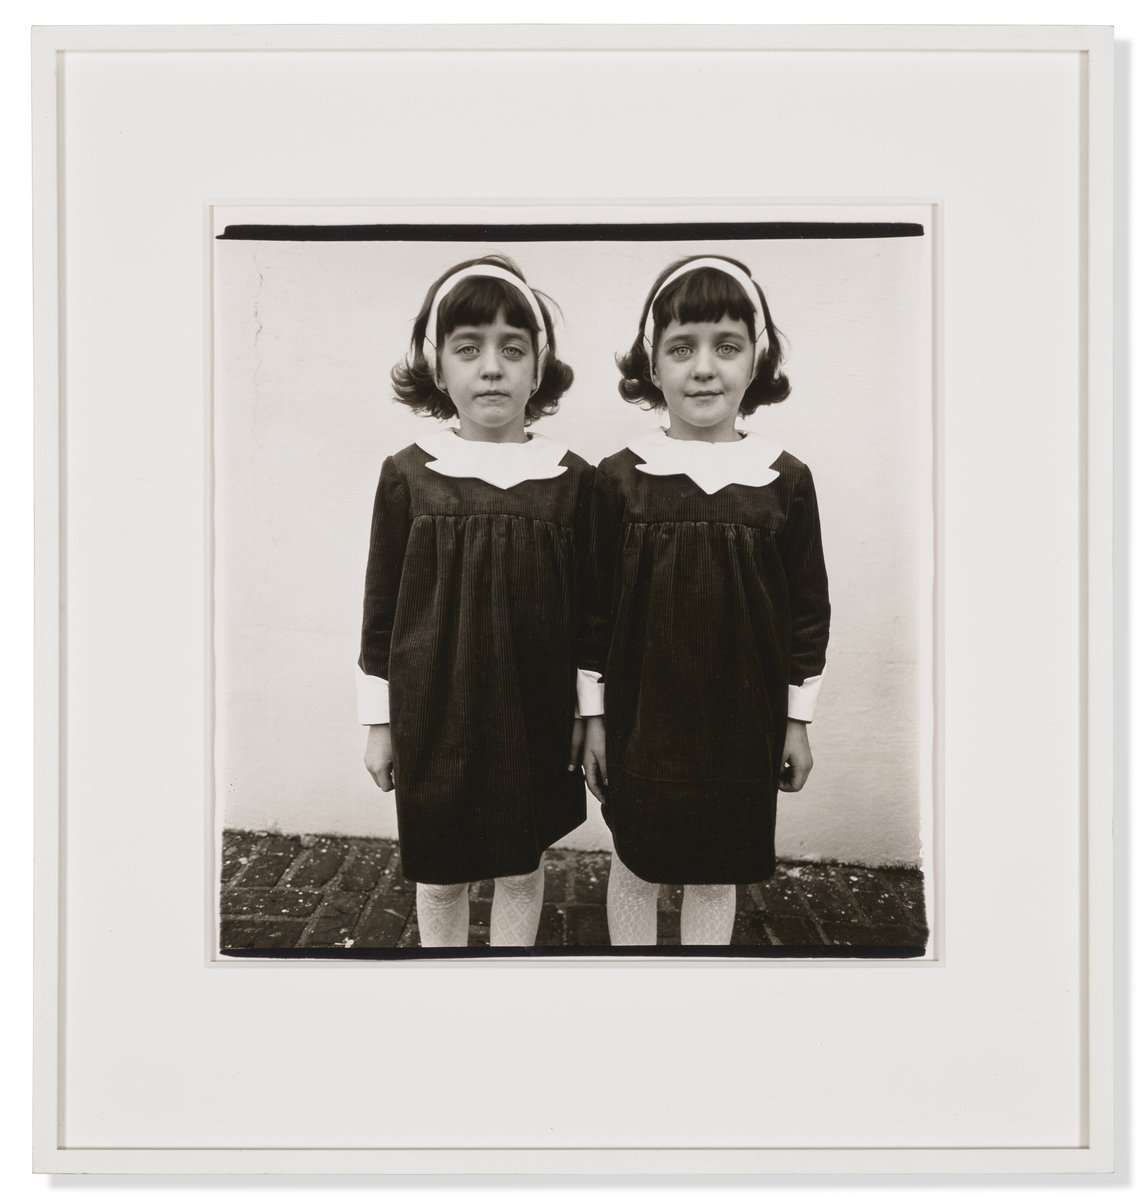 #ArtistRecord Diane Arbus's most celebrated work, ‘Identical twins, (Cathleen and Colleen), Roselle, New Jersey, 1966’ has sold for $1,197,000 during tonight's #21stCenturyEveningSale